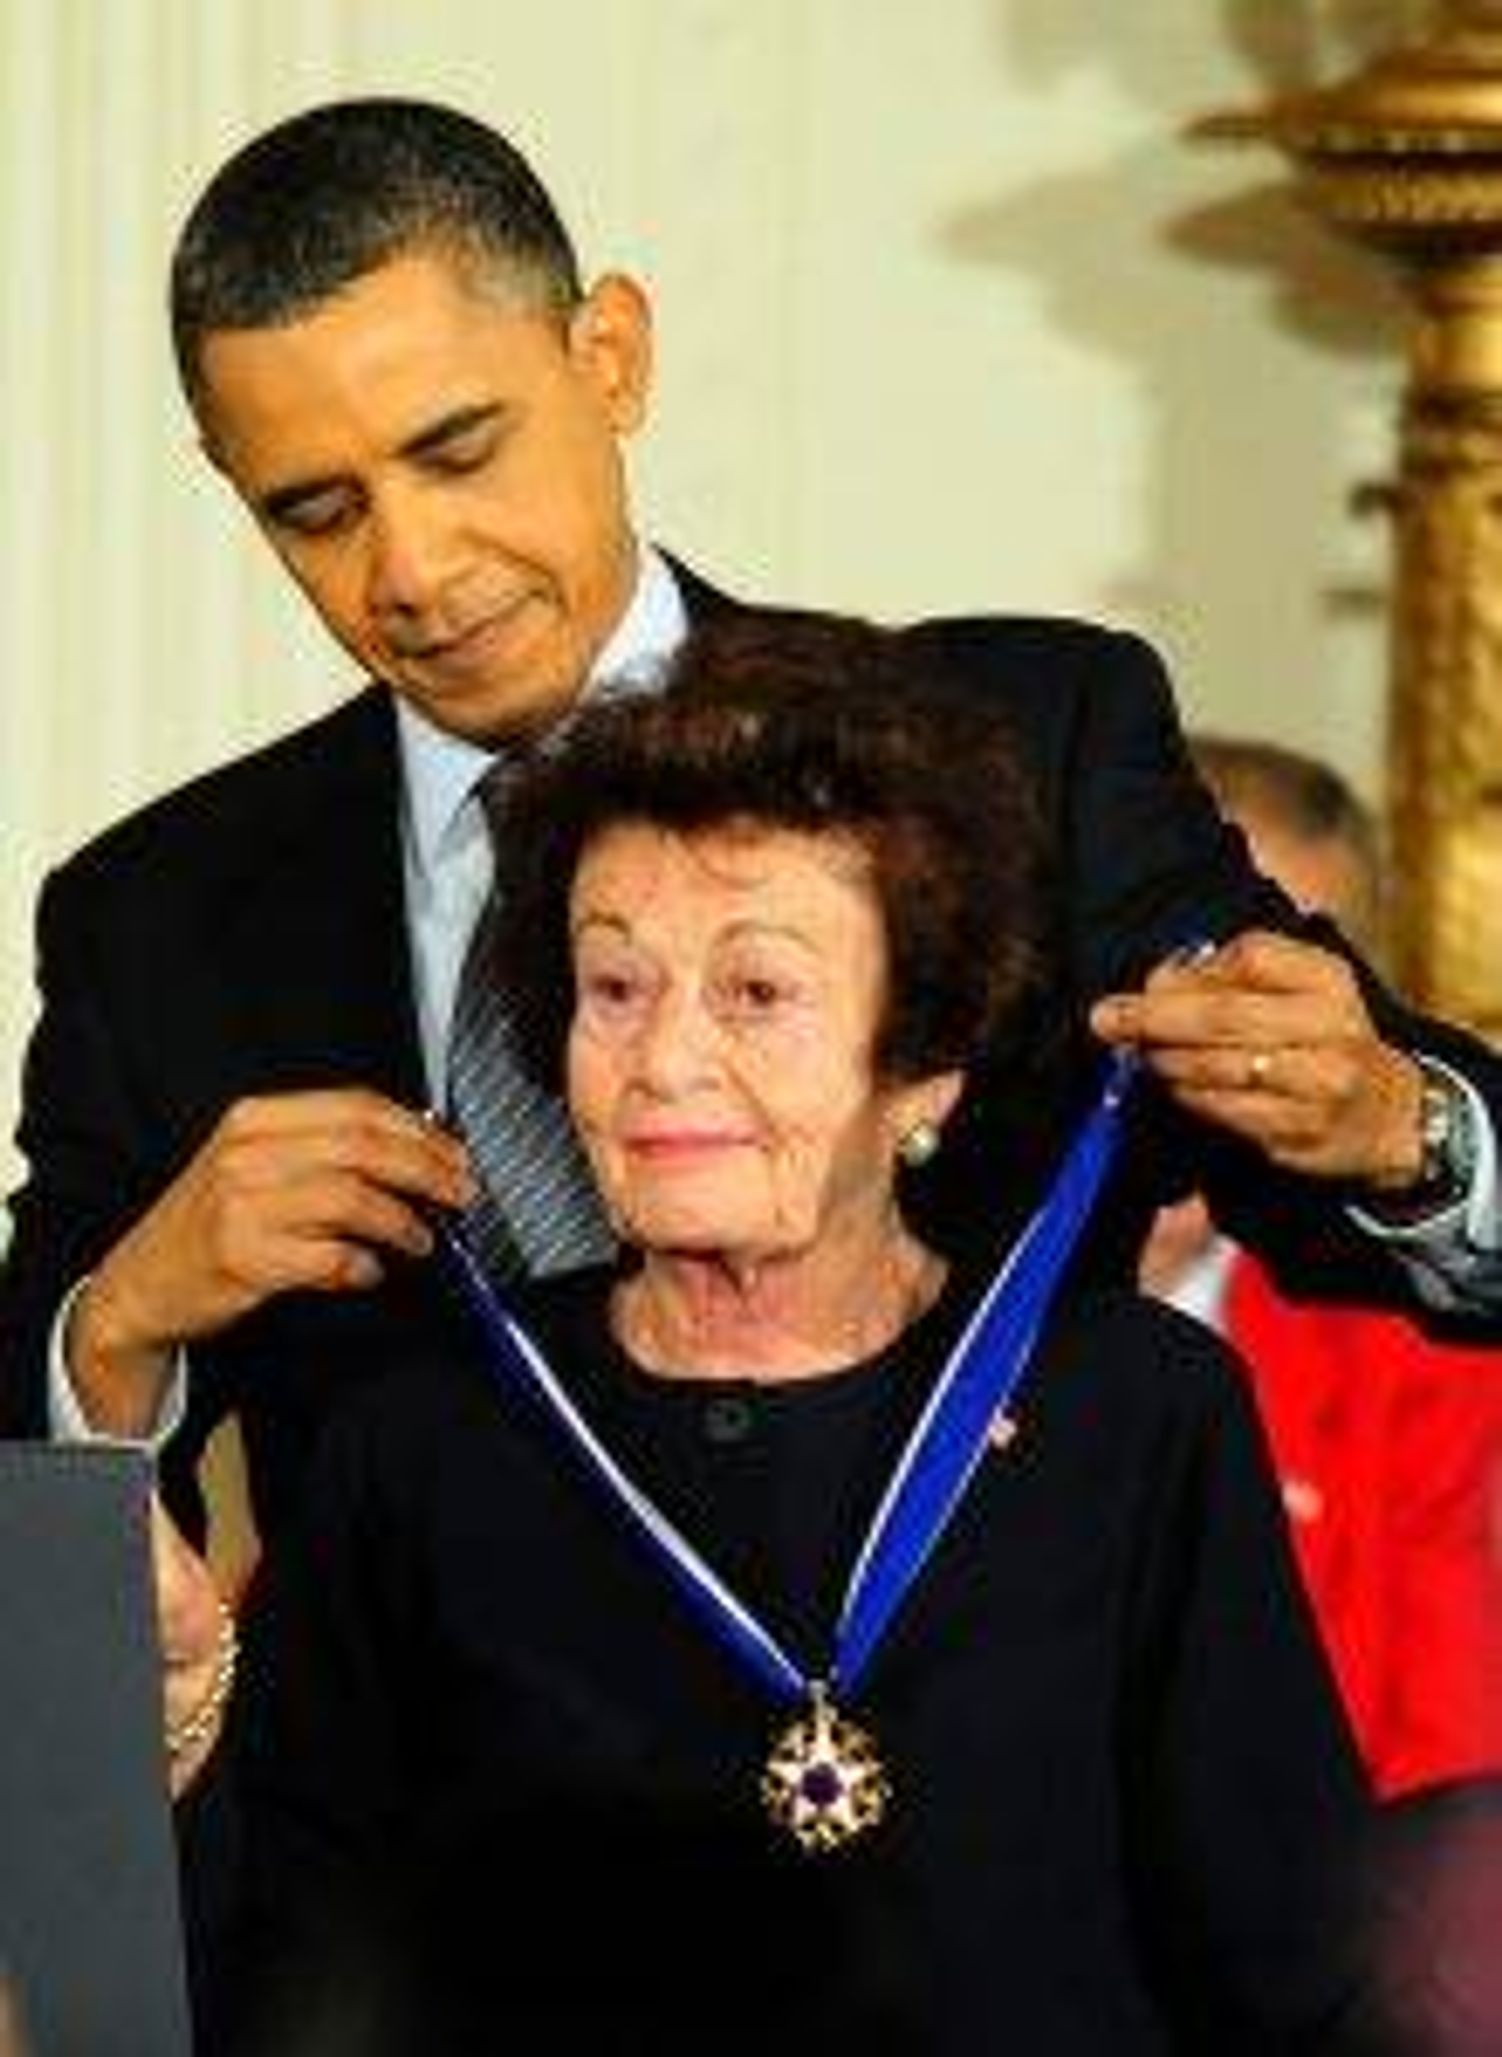 Gerda receiving the Presidential Medal of Freedom from President Obama in 2011